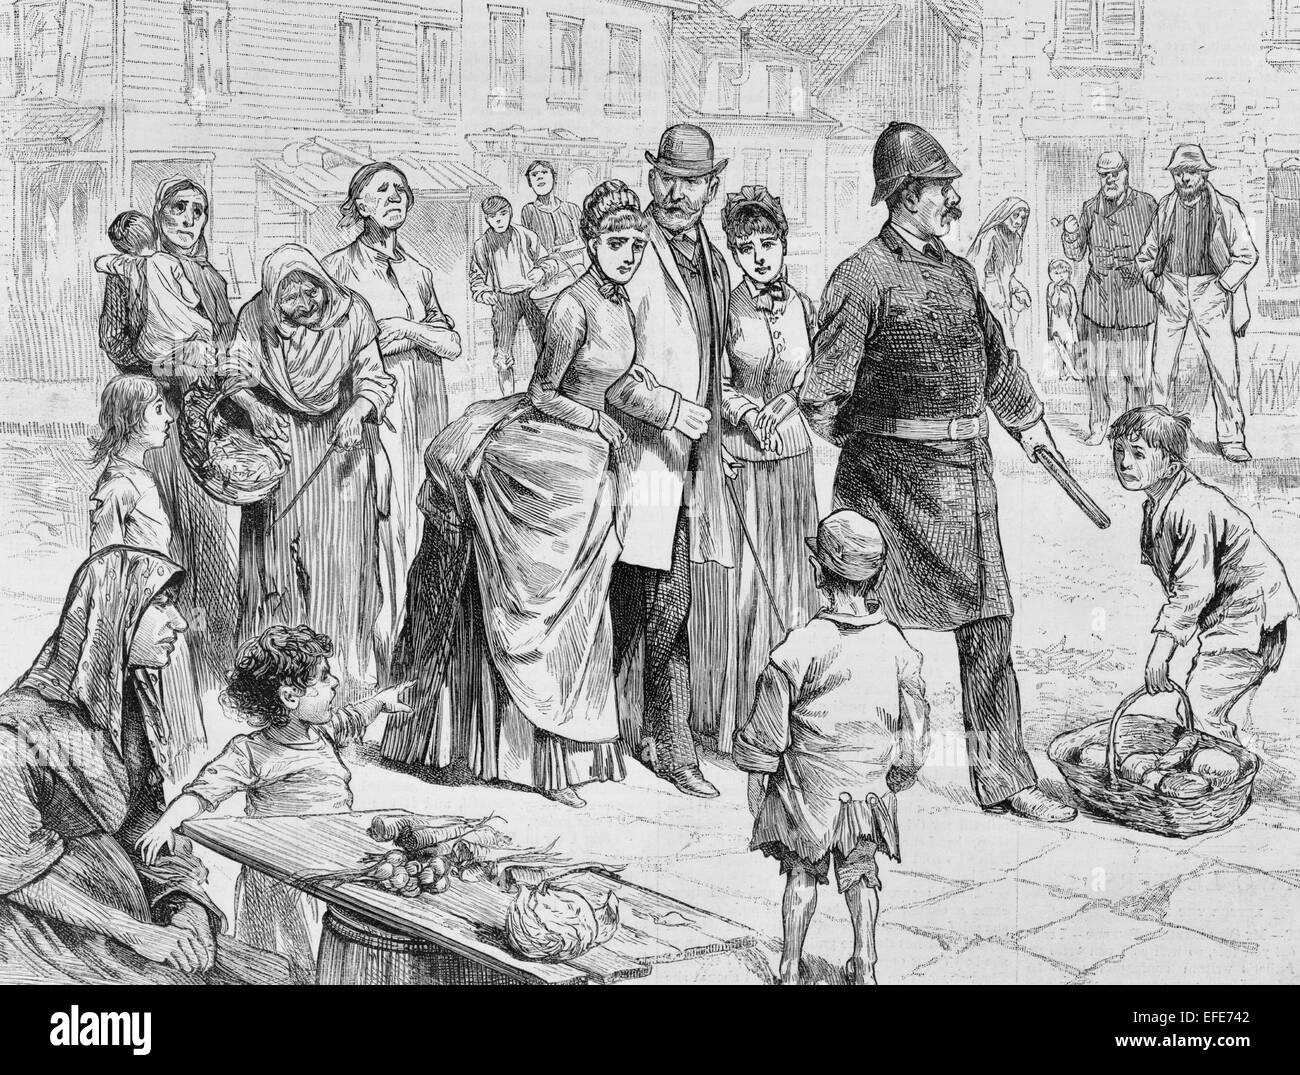 New York City - Doing the Slums - A scene in Five Points. Policeman leading upper class people through the Five Points neighborhood, circa 1885. Stock Photo